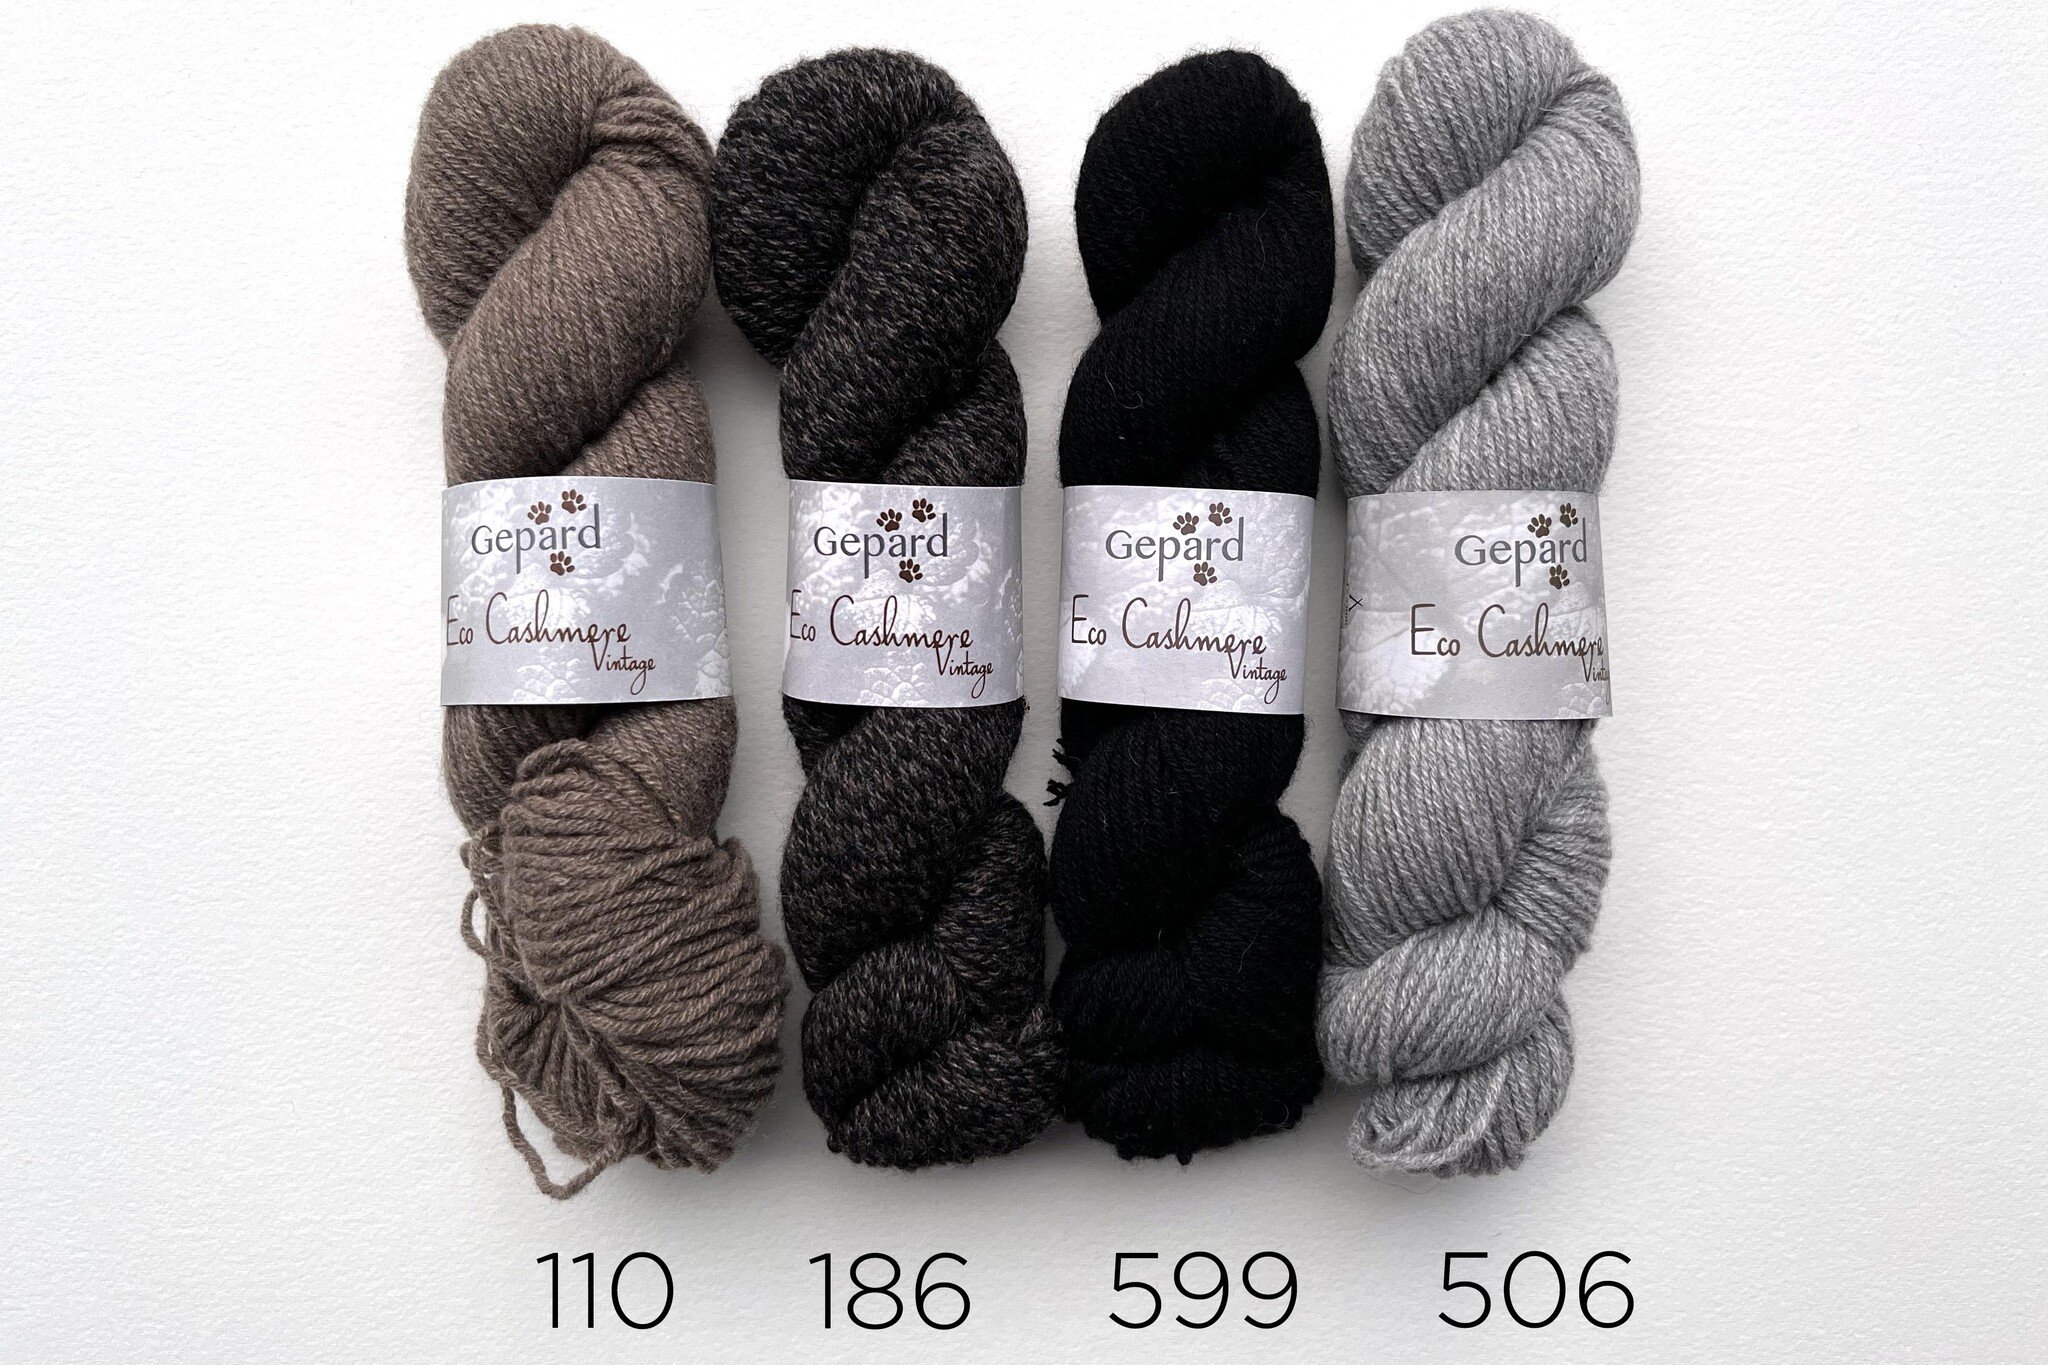 Gepard ECO CASHMERE VINTAGE - Beautiful Knitters